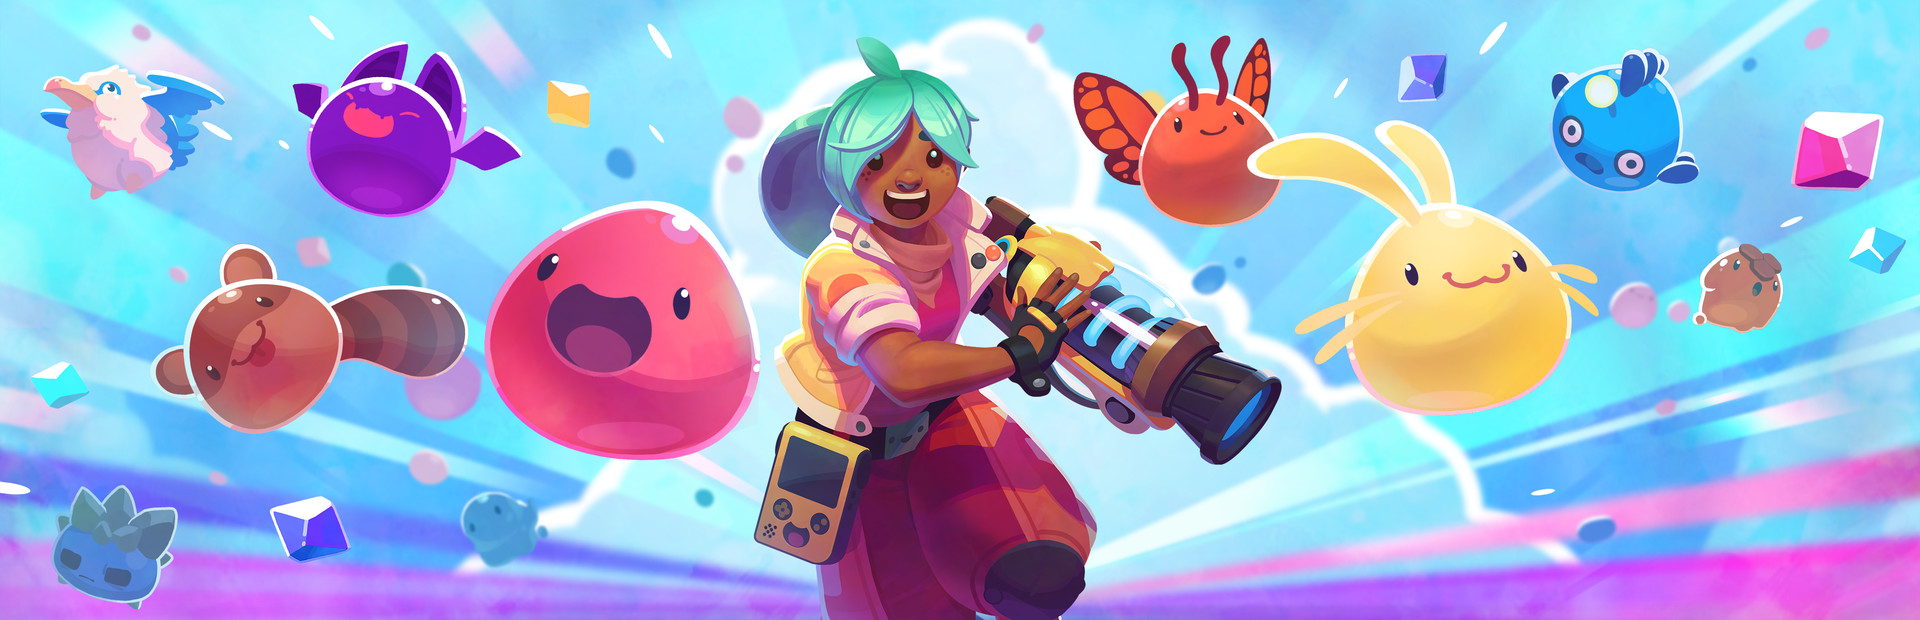 Slime Rancher 2 cover image